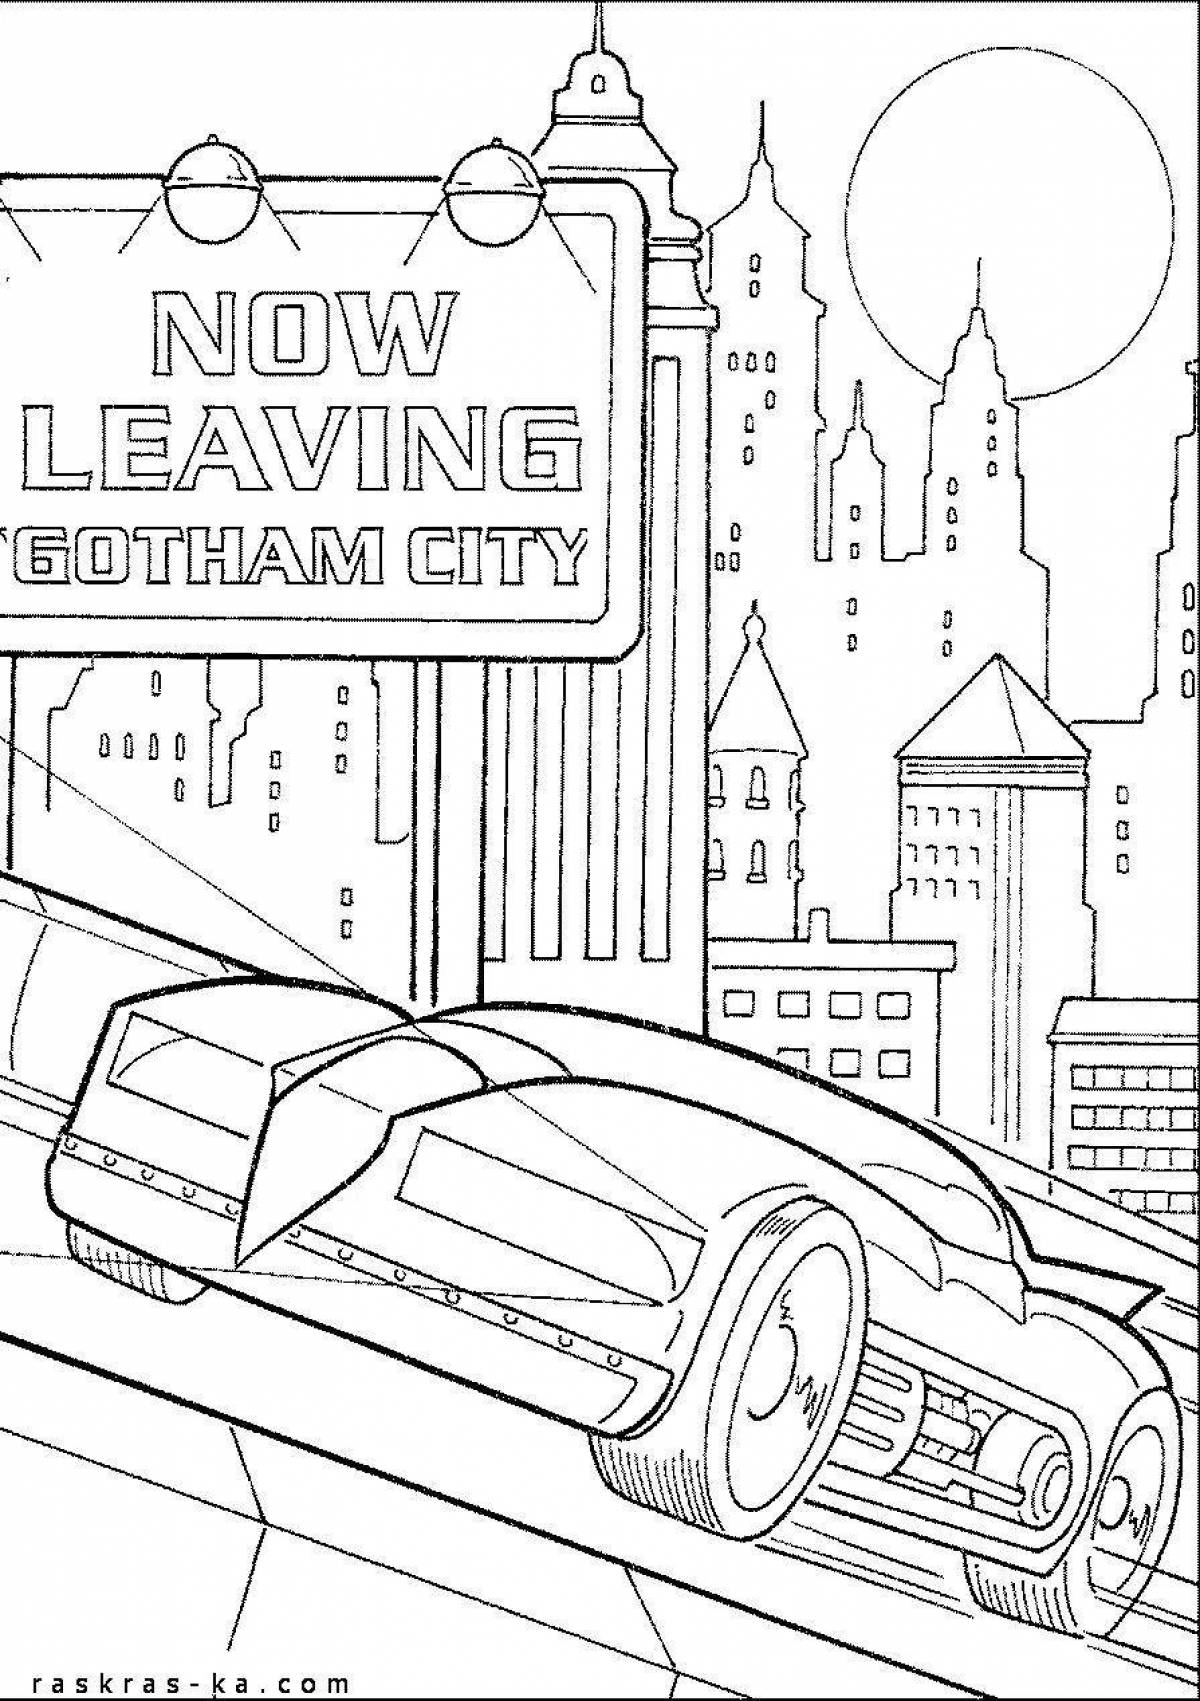 Intriguing Batman coloring book for mobile devices